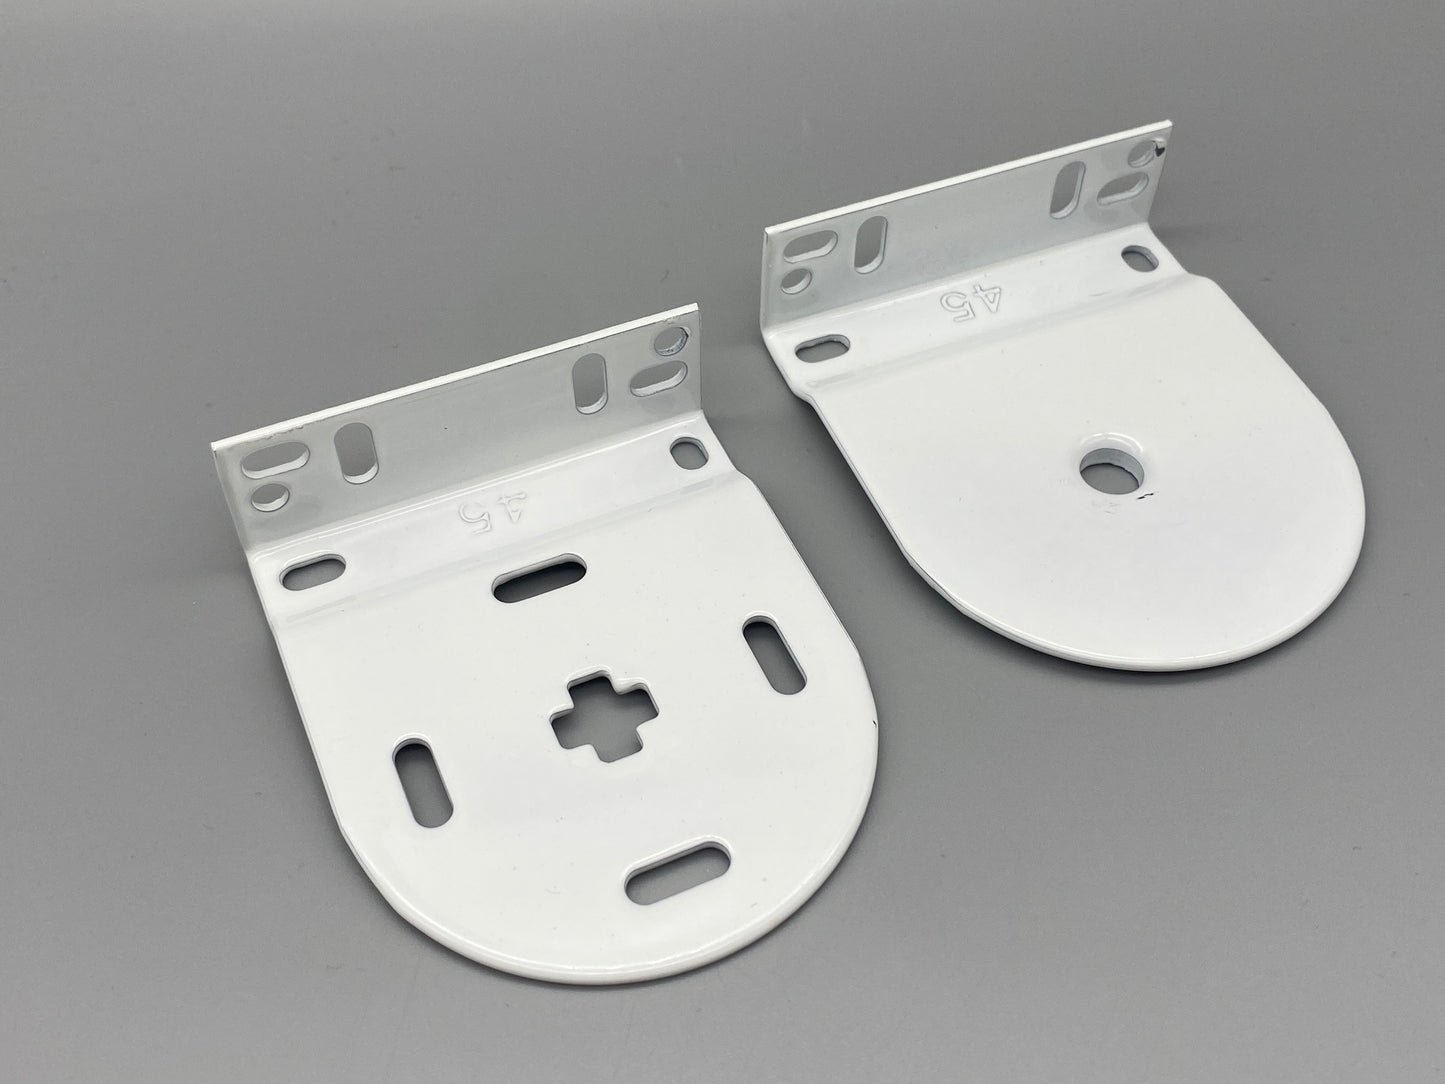 Pair of Replacement Roller Blinds Brackets Set - Metal Brackets - for 45mm System